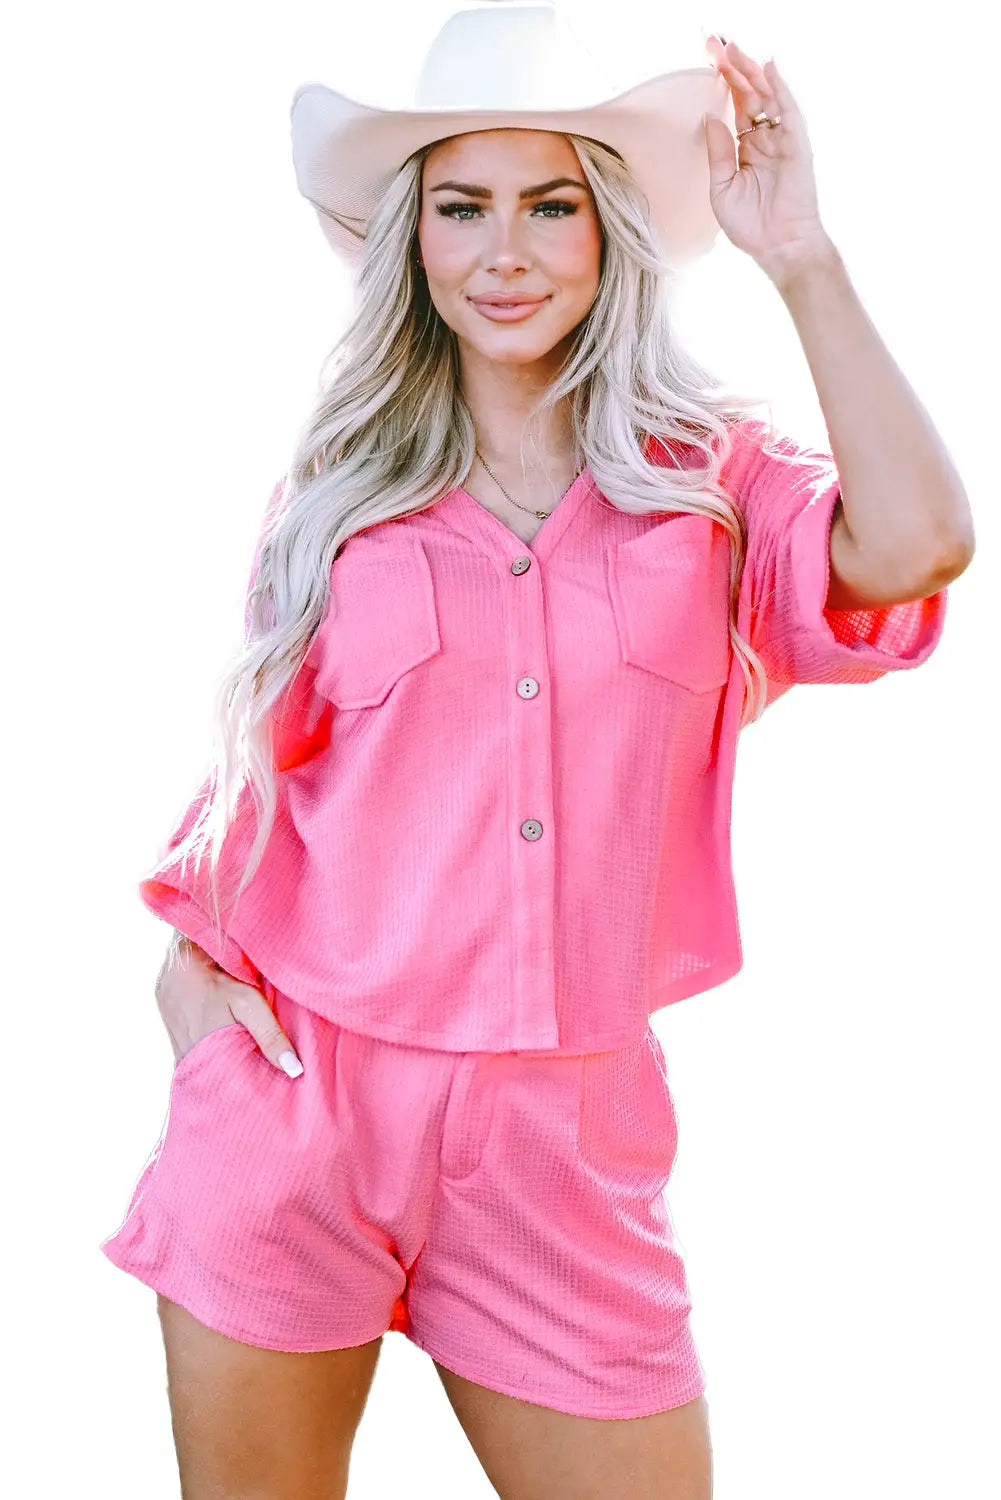 Bright pink textured chest pocket half sleeve shirt shorts outfit - loungewear